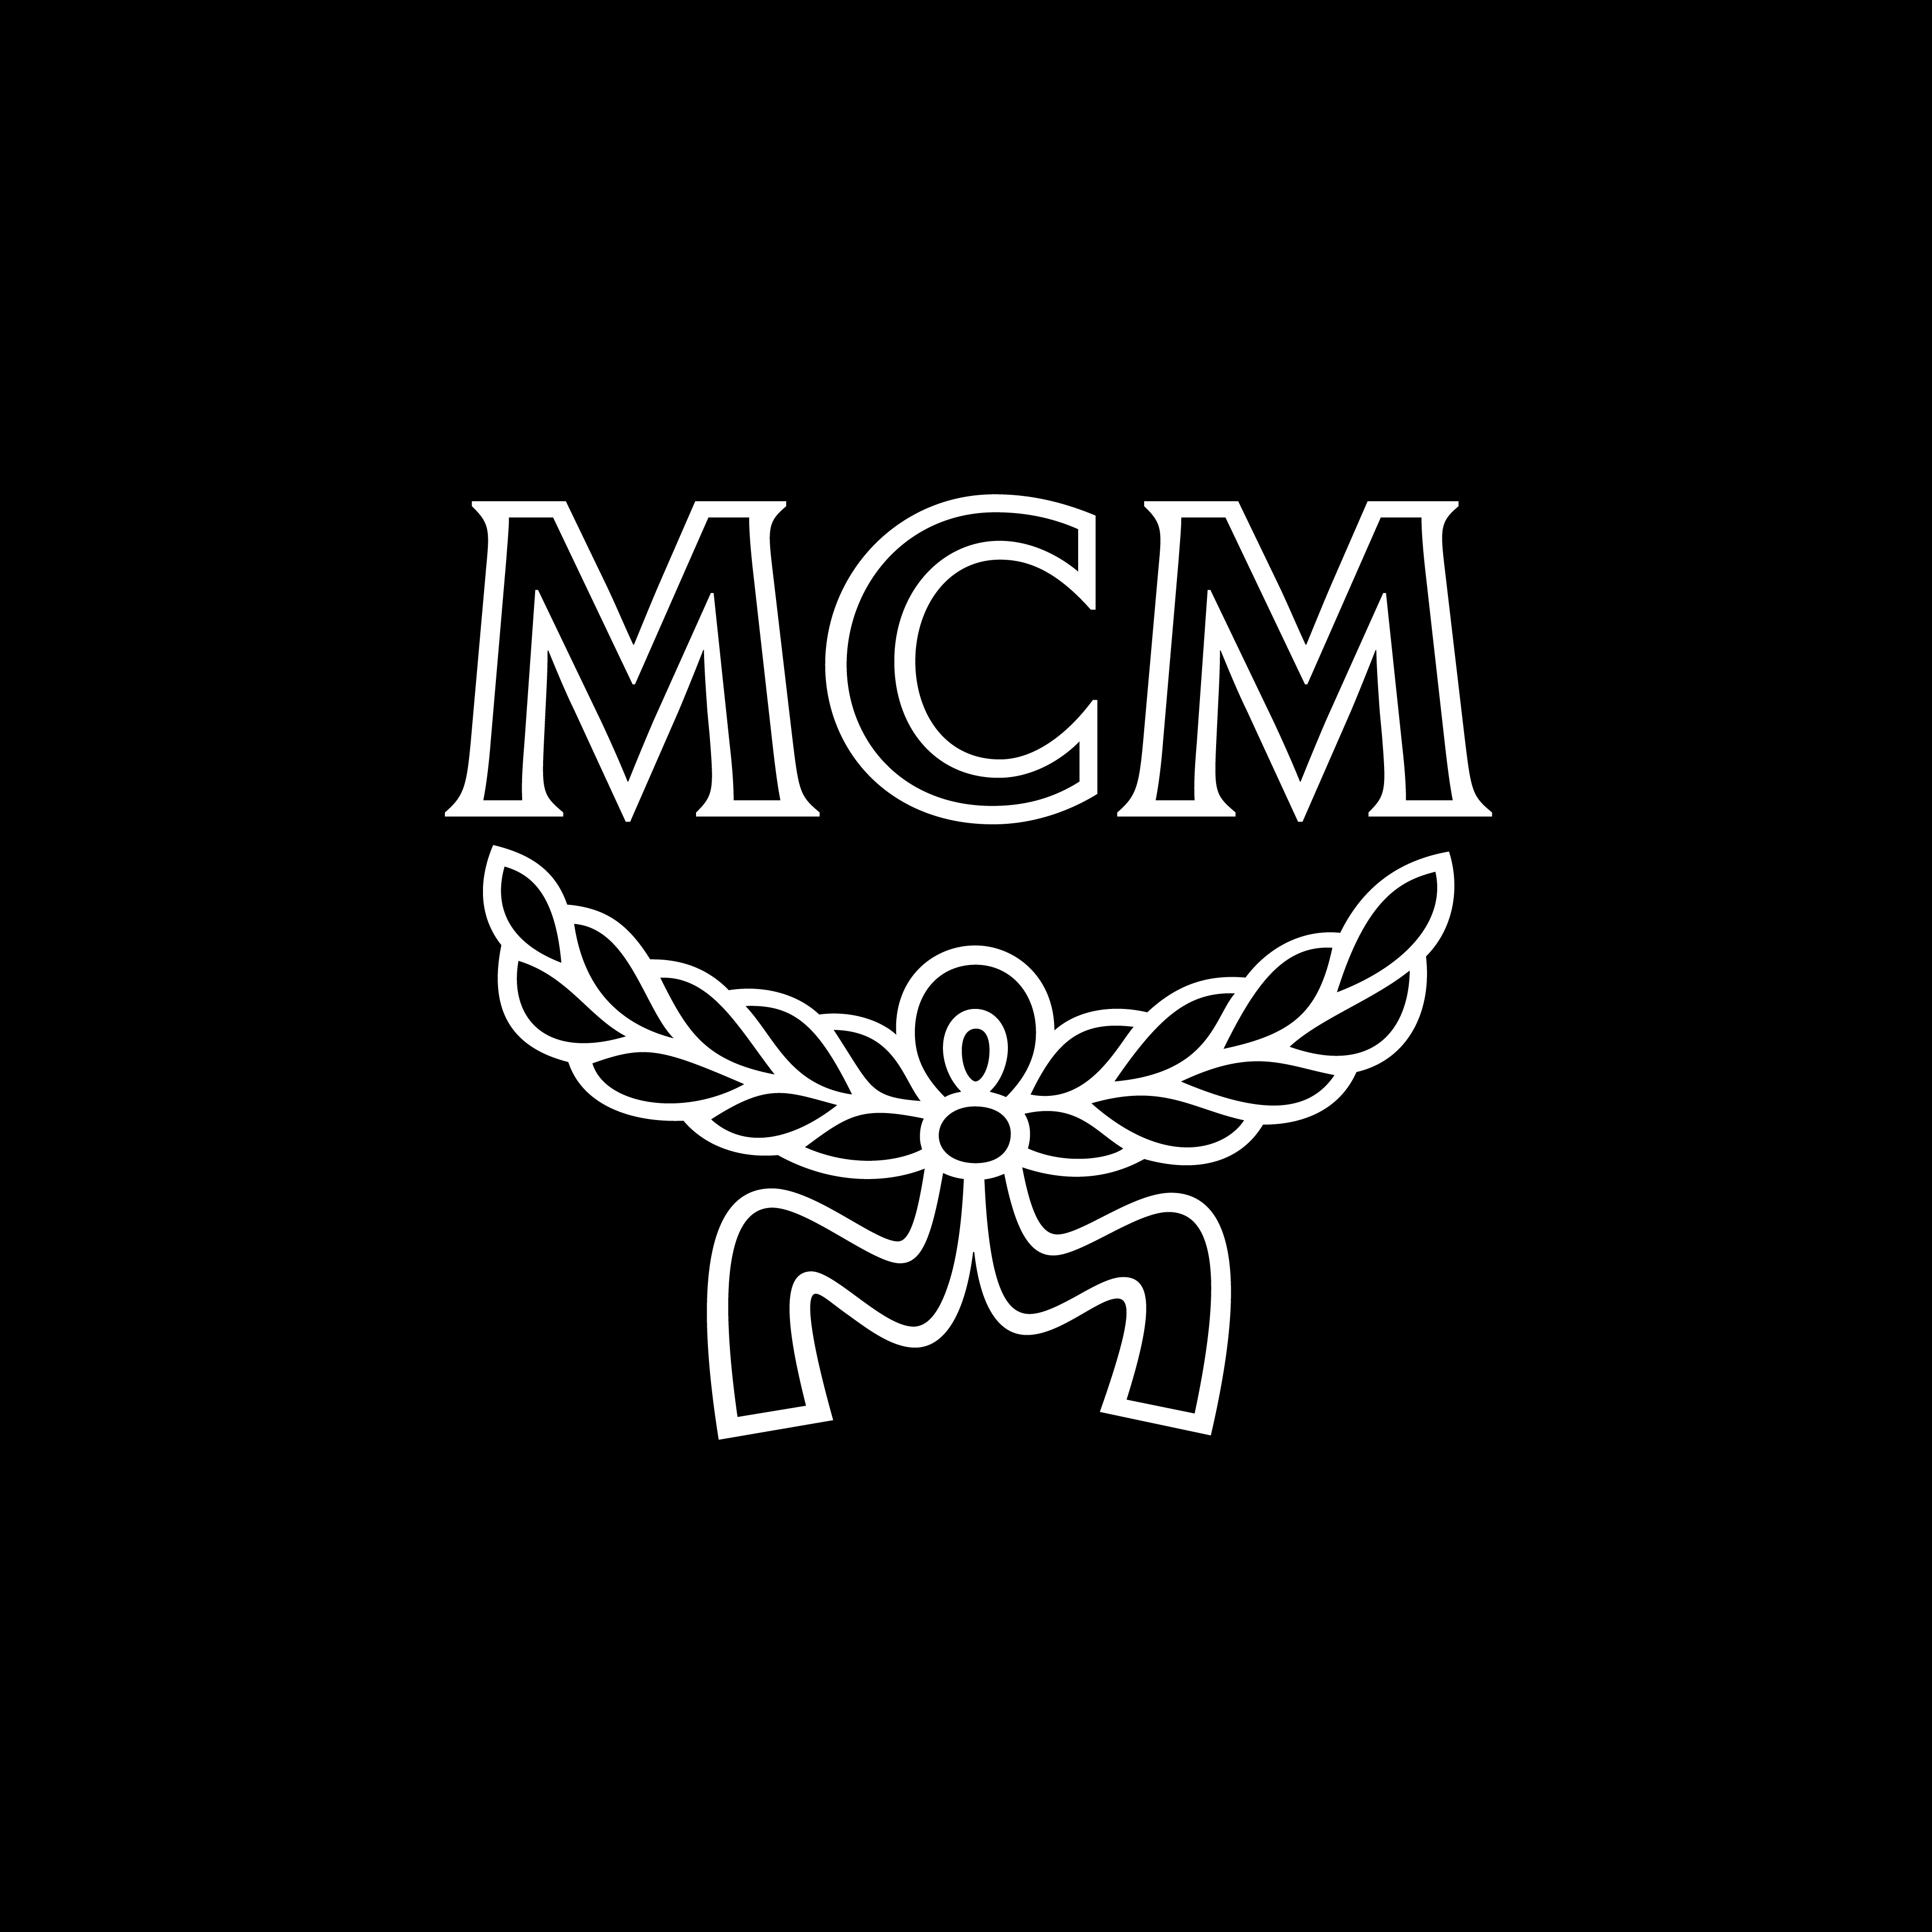 About MCM, Our History